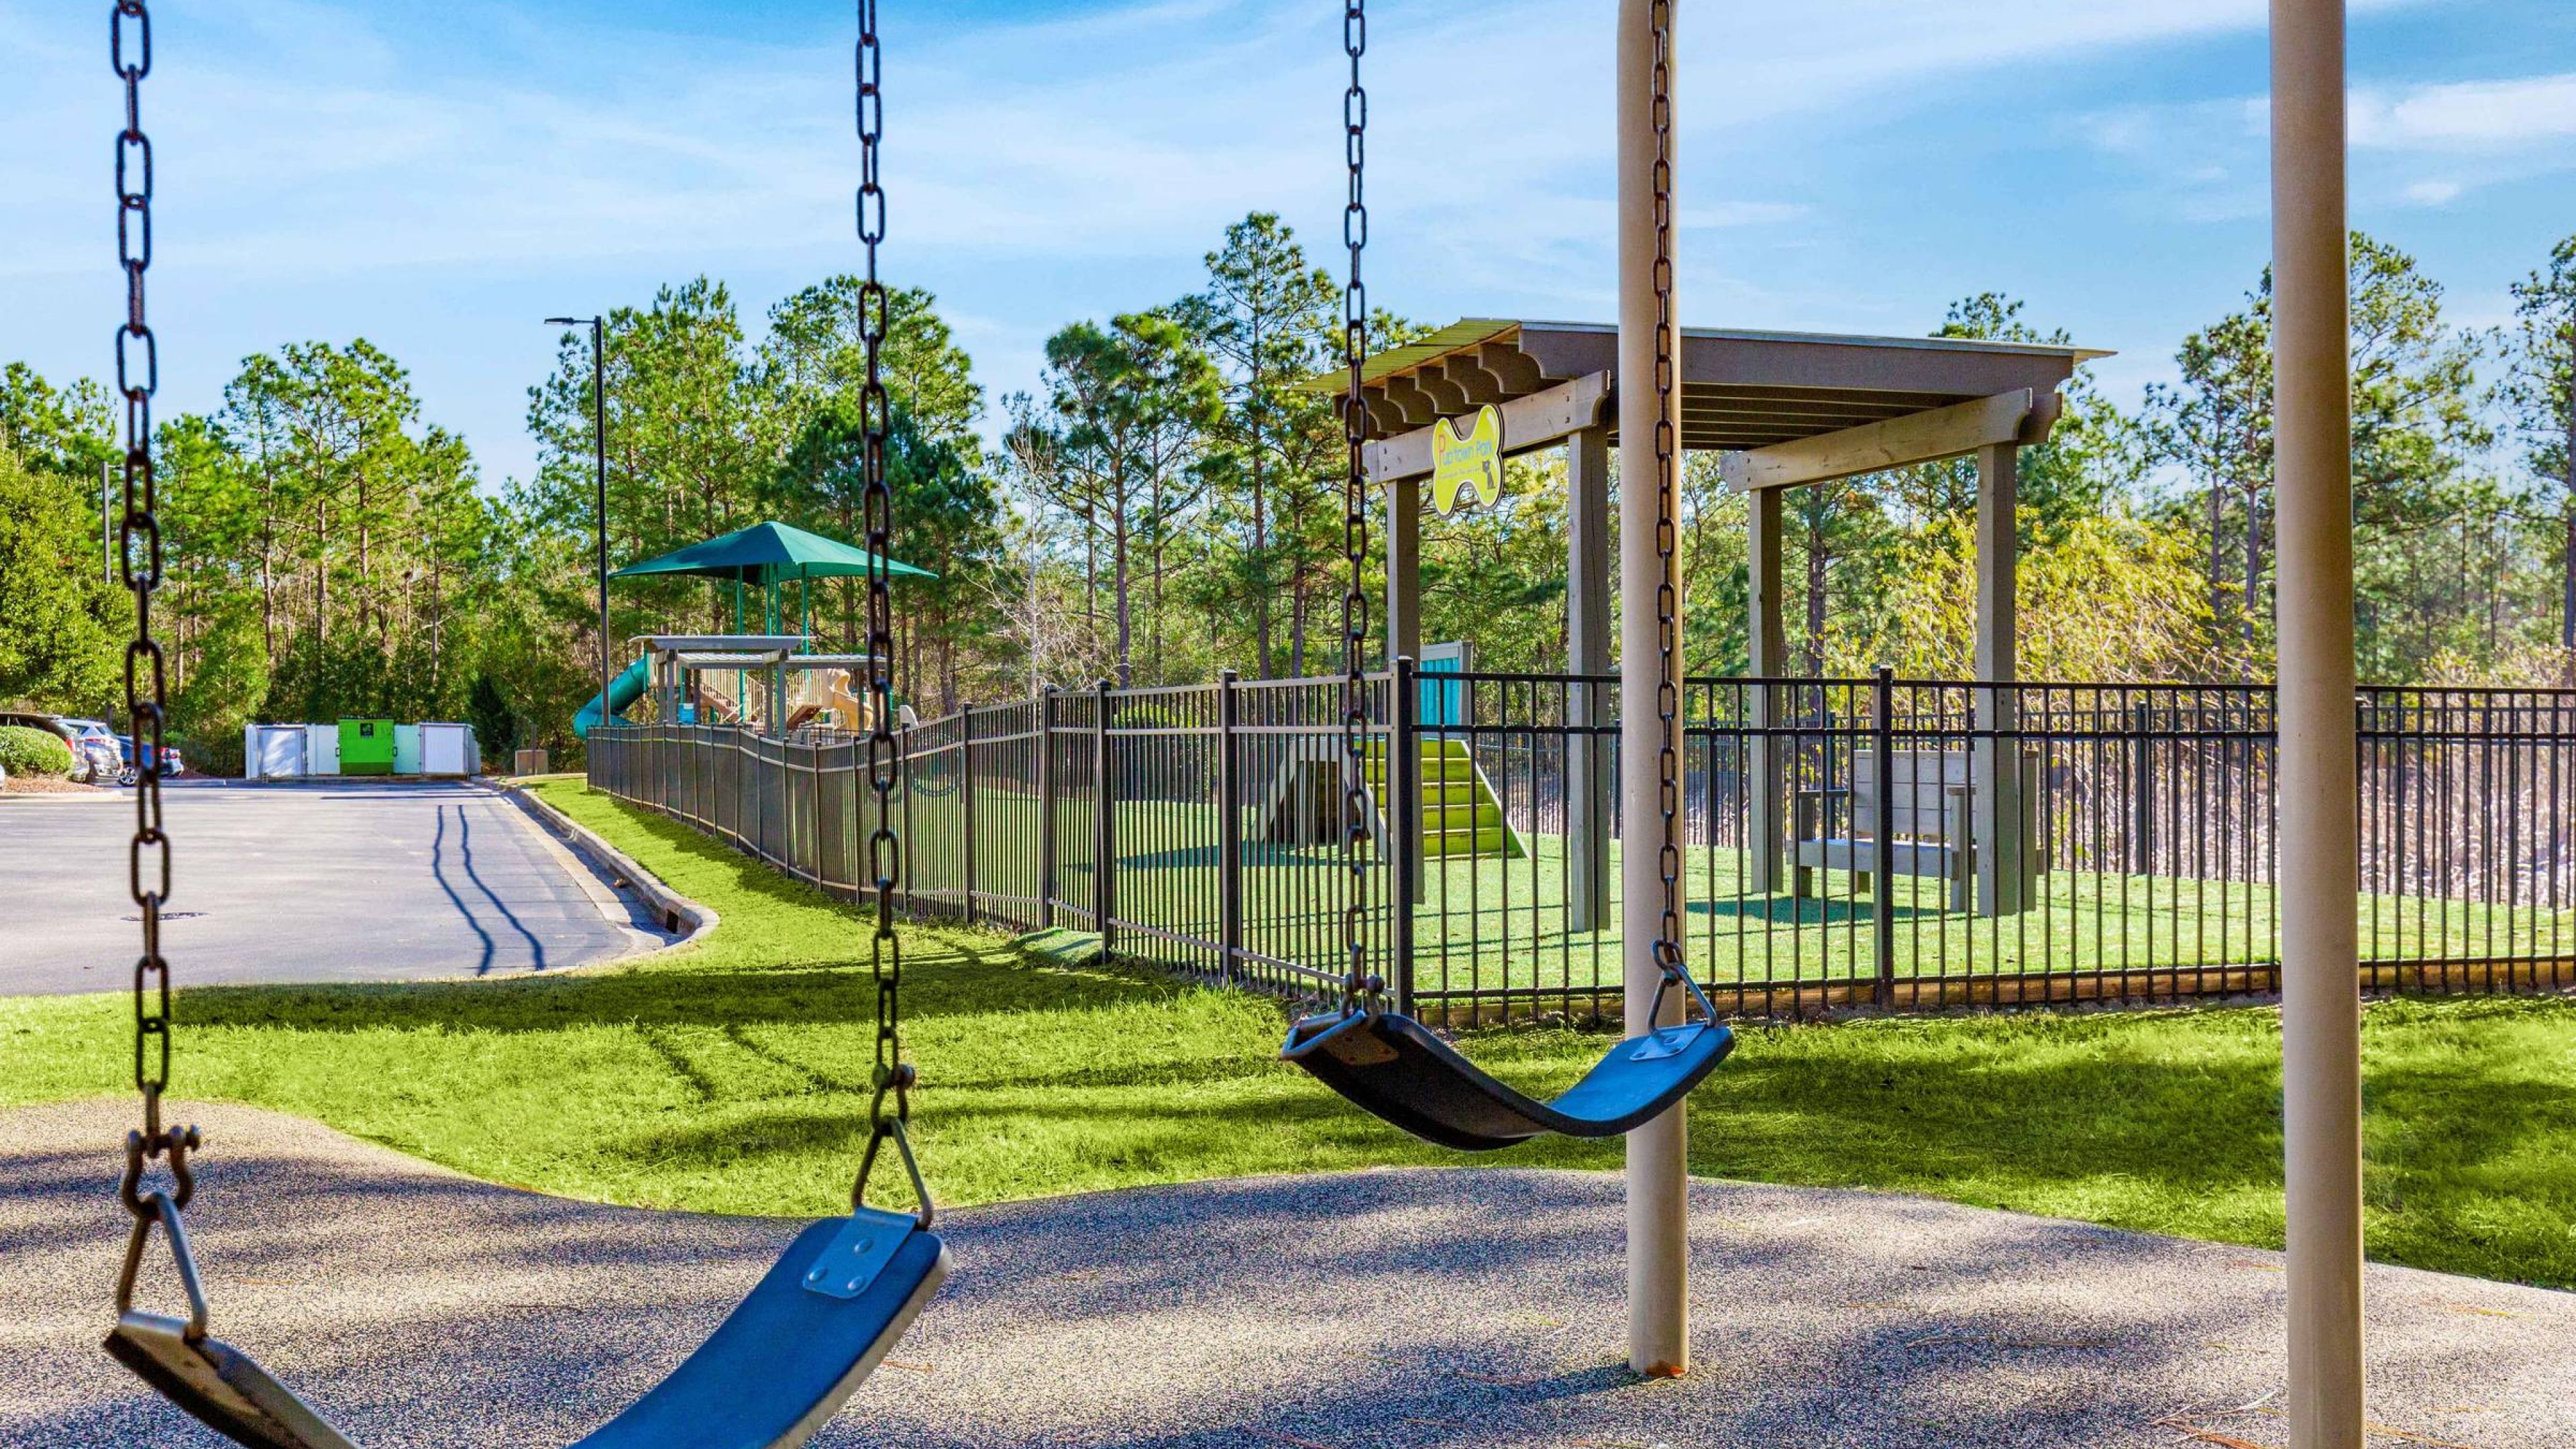 Hawthorne at Murrayville playground with blue swings, green turf, and tall pine trees in a sunny park setting